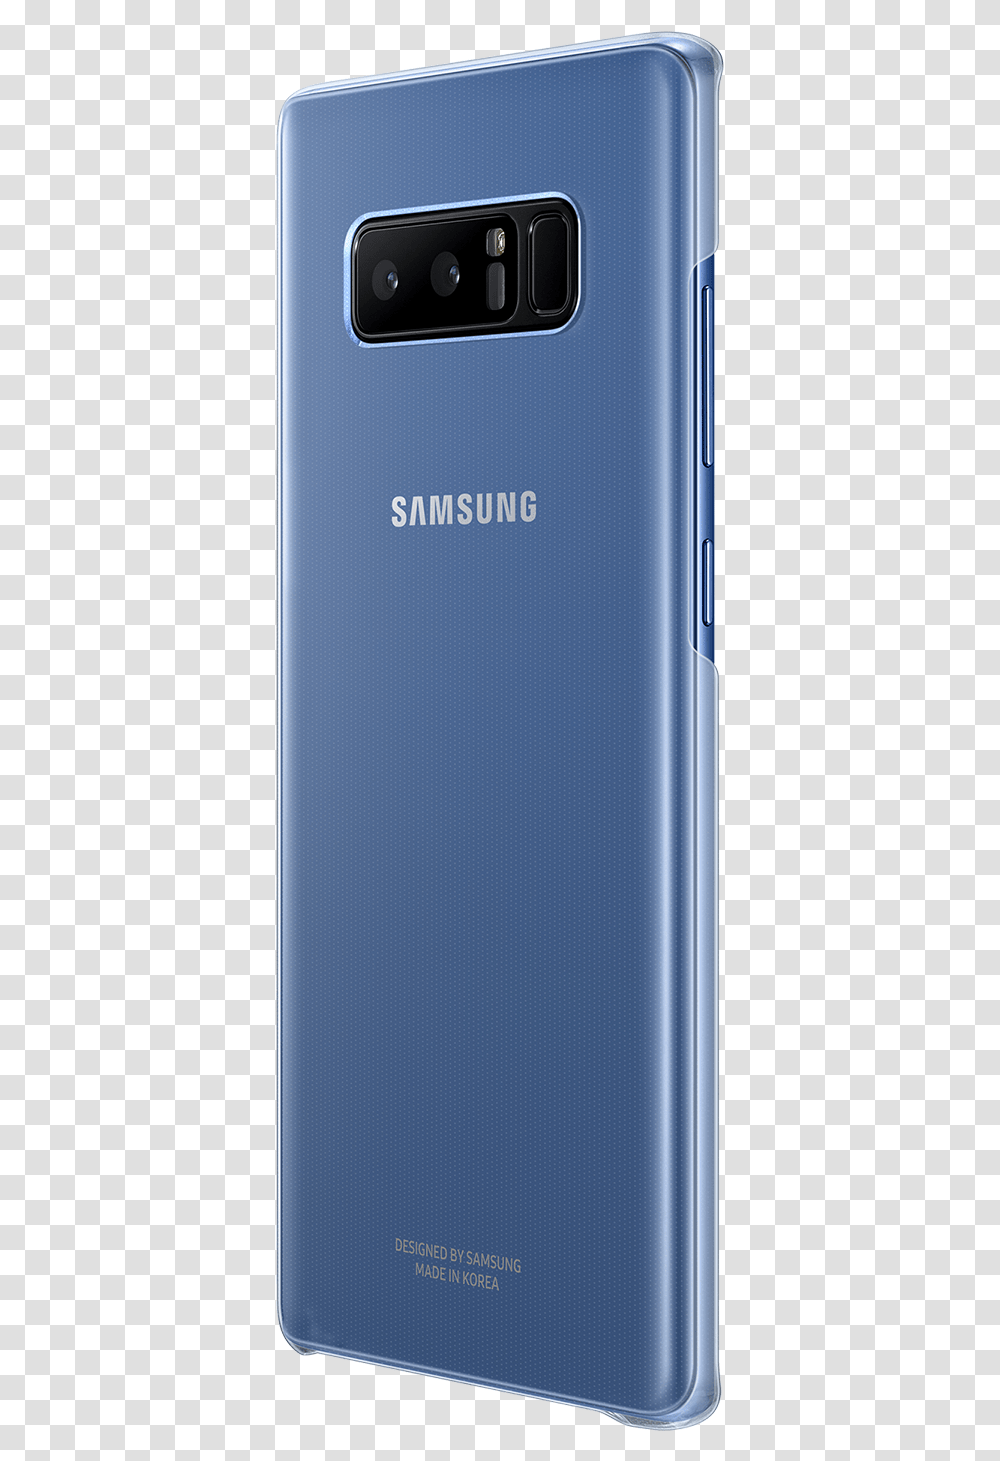 Samsung Galaxy Note8 Skaidrus Dklas Chelsea Fc 2010 2011, Mobile Phone, Electronics, Cell Phone Transparent Png